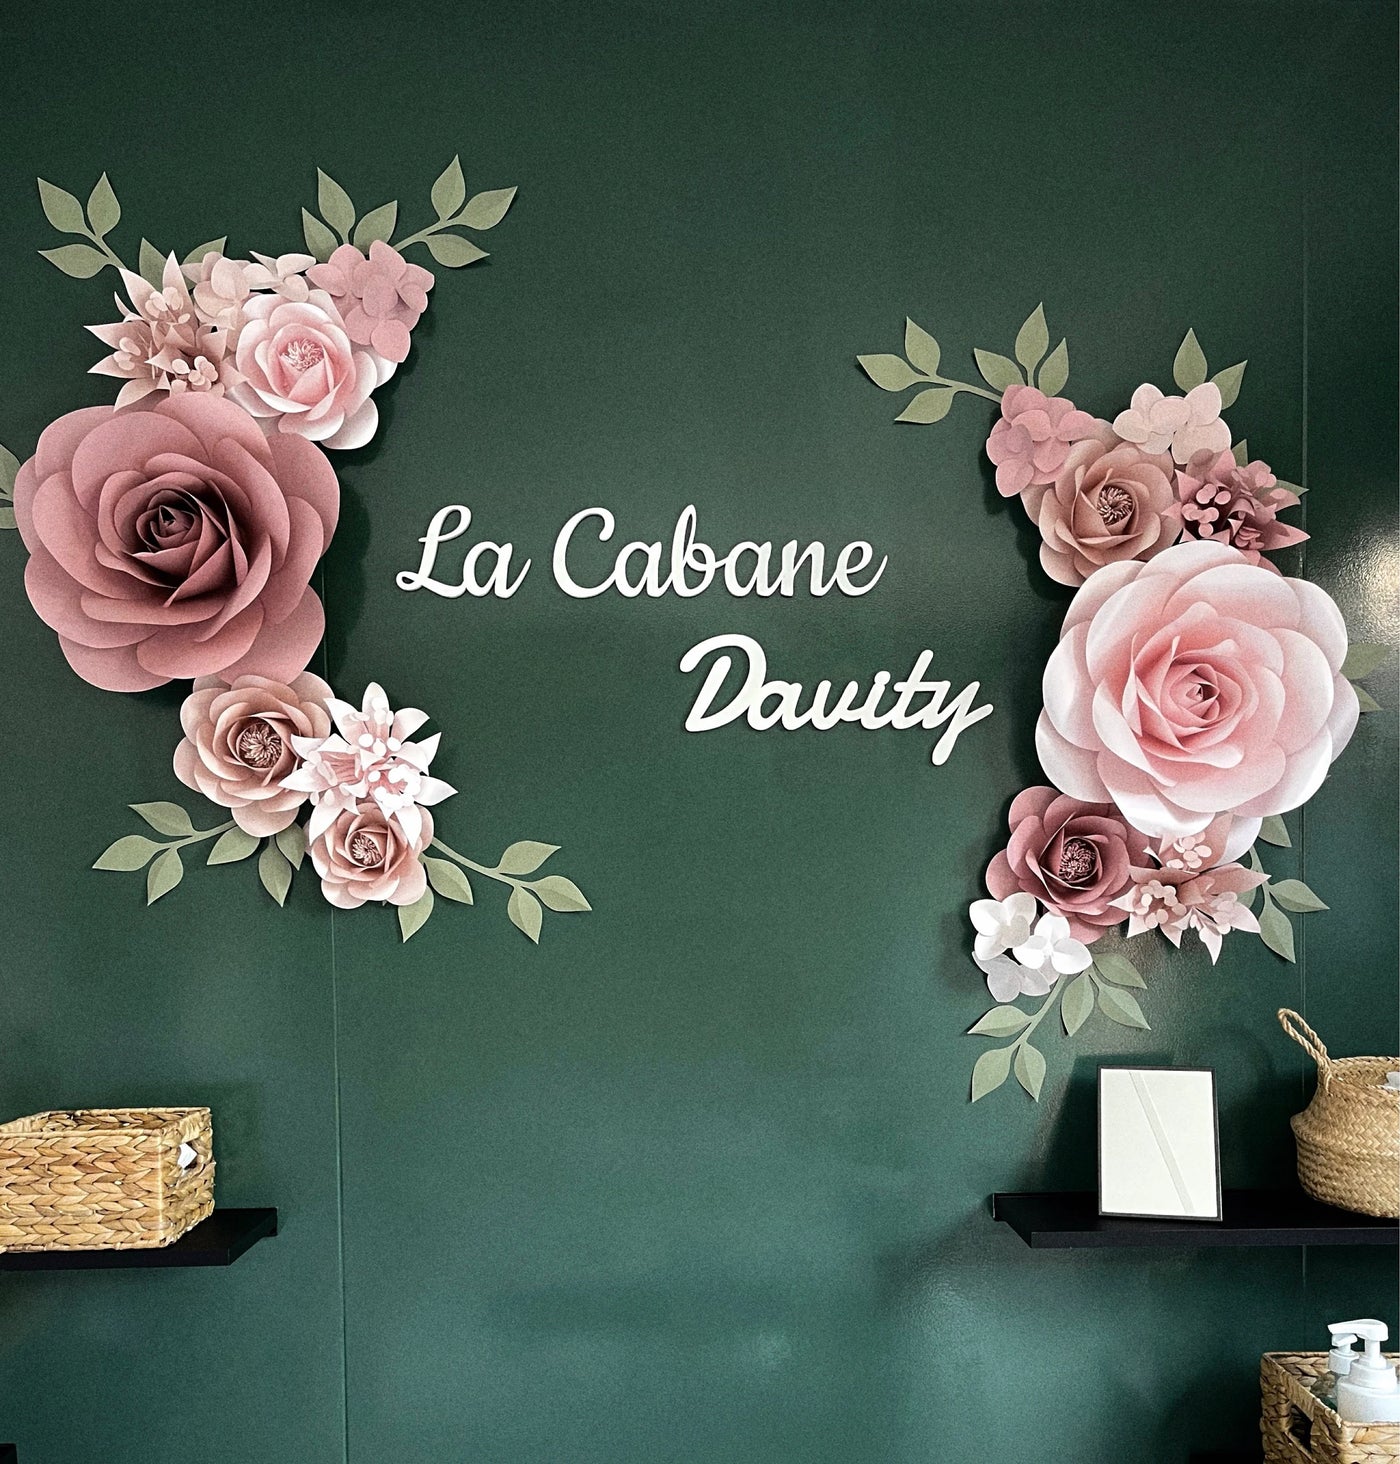 Beautiful paper flowers for girls' nursery, creating a whimsical and playful ambiance.